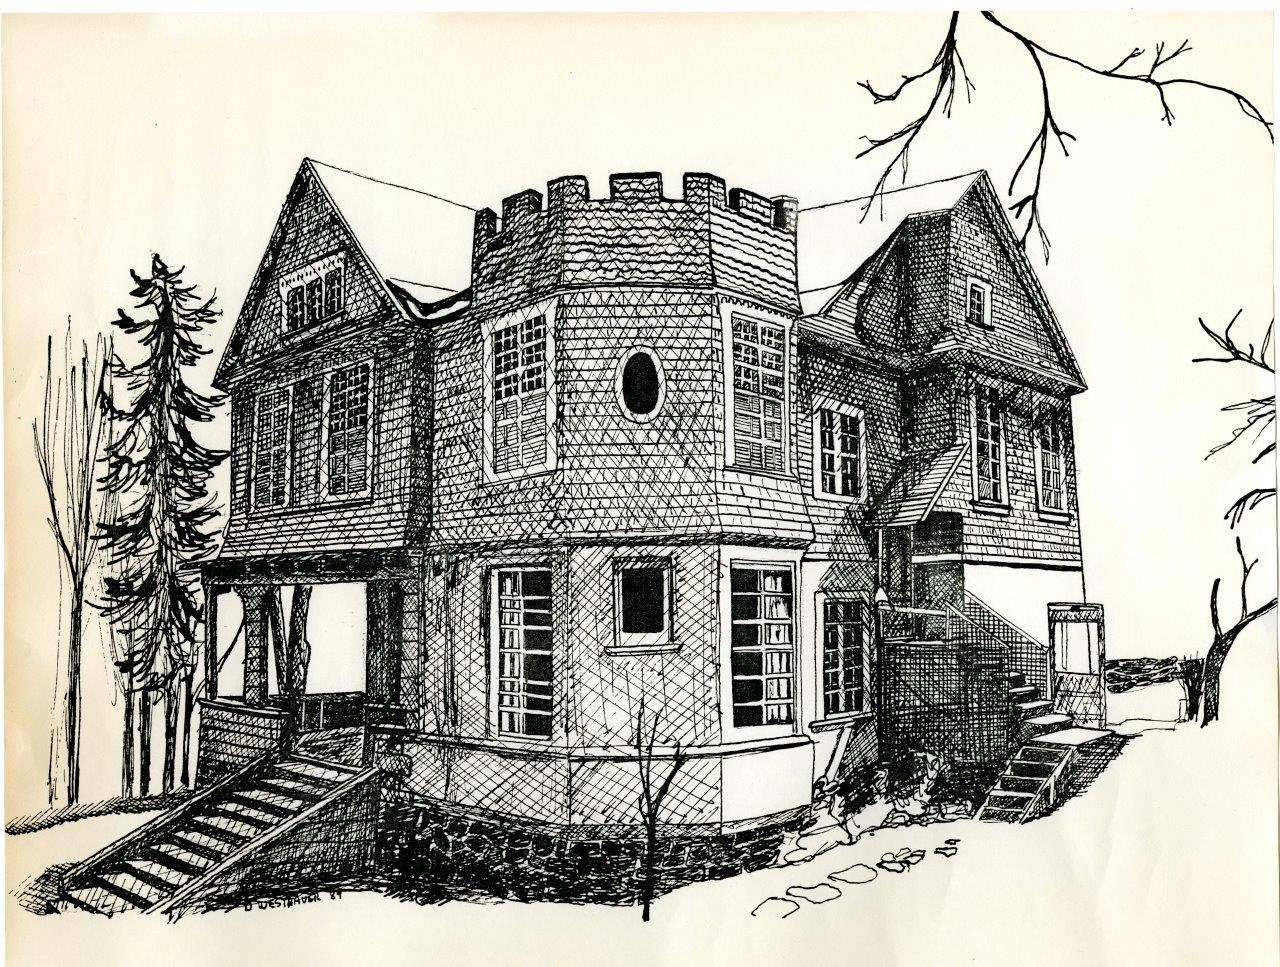 Sketch of Ross Thompson's home on Union Avenue.